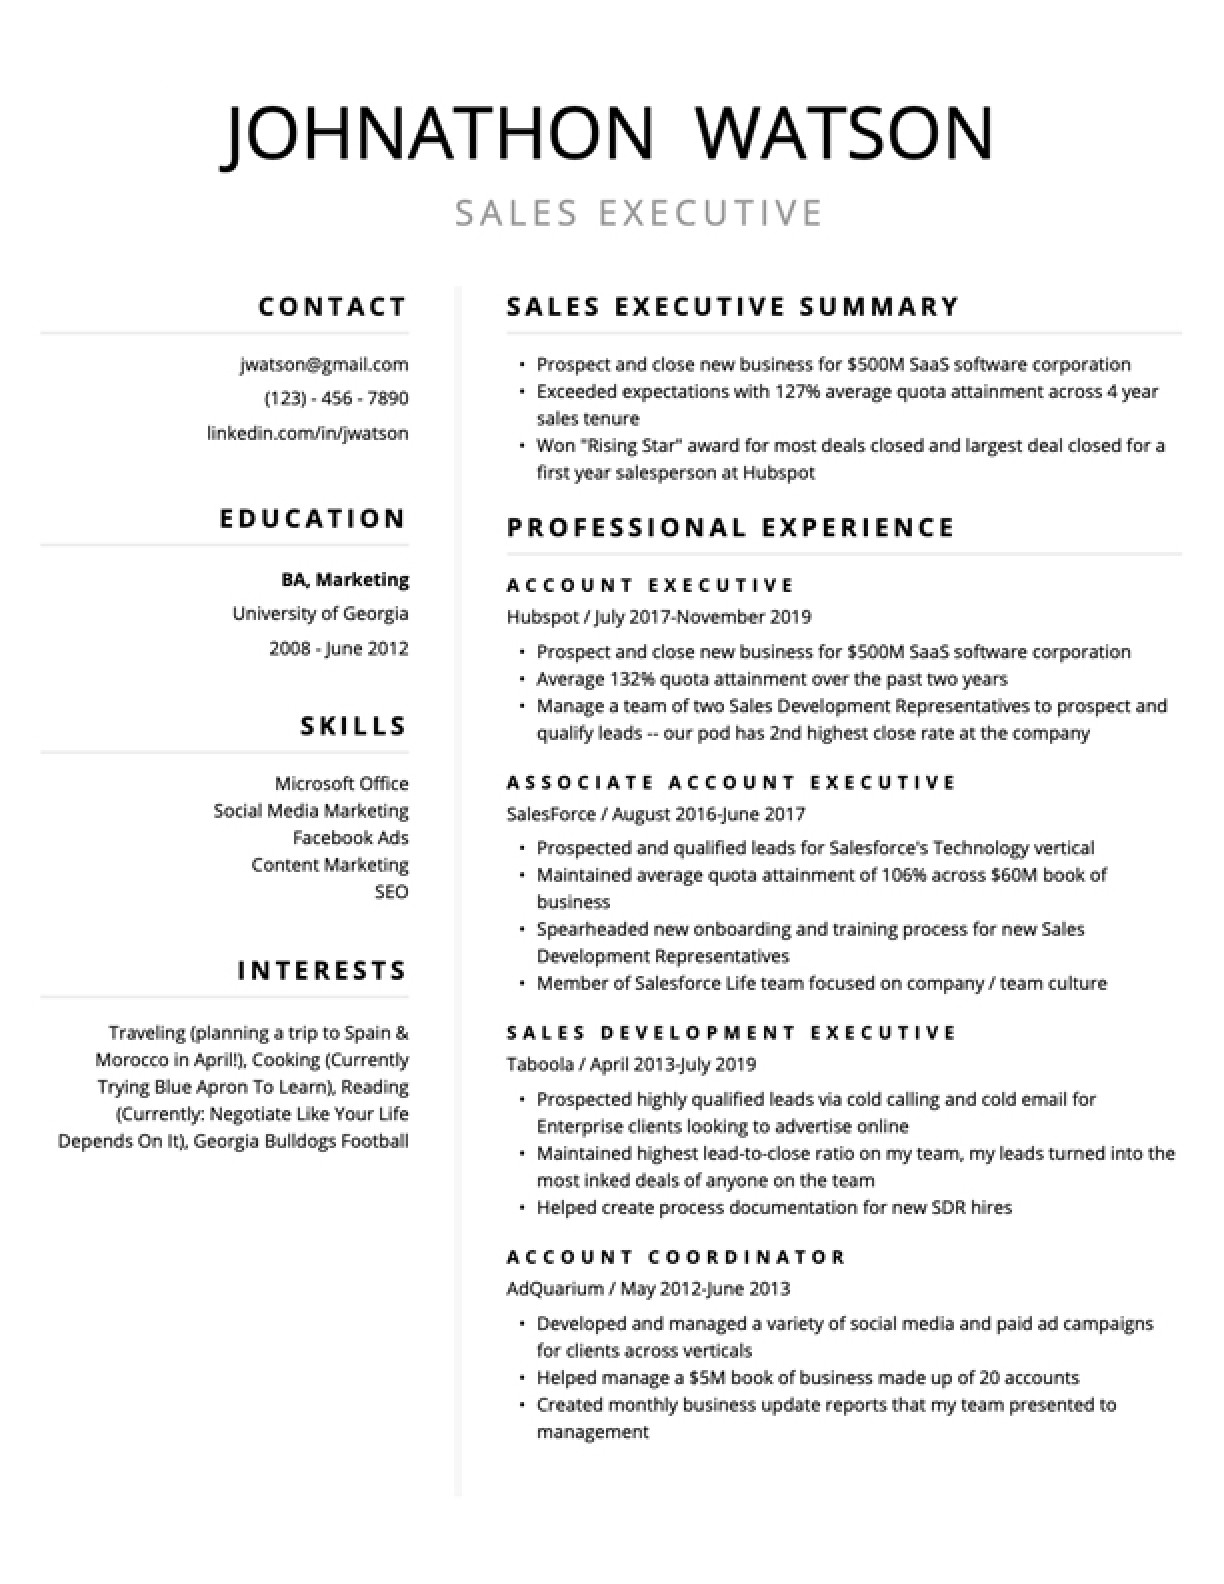 Sample Resumes for Low Icnome Jobs Free Resume Templates for 2022 (edit & Download) Resybuild.io